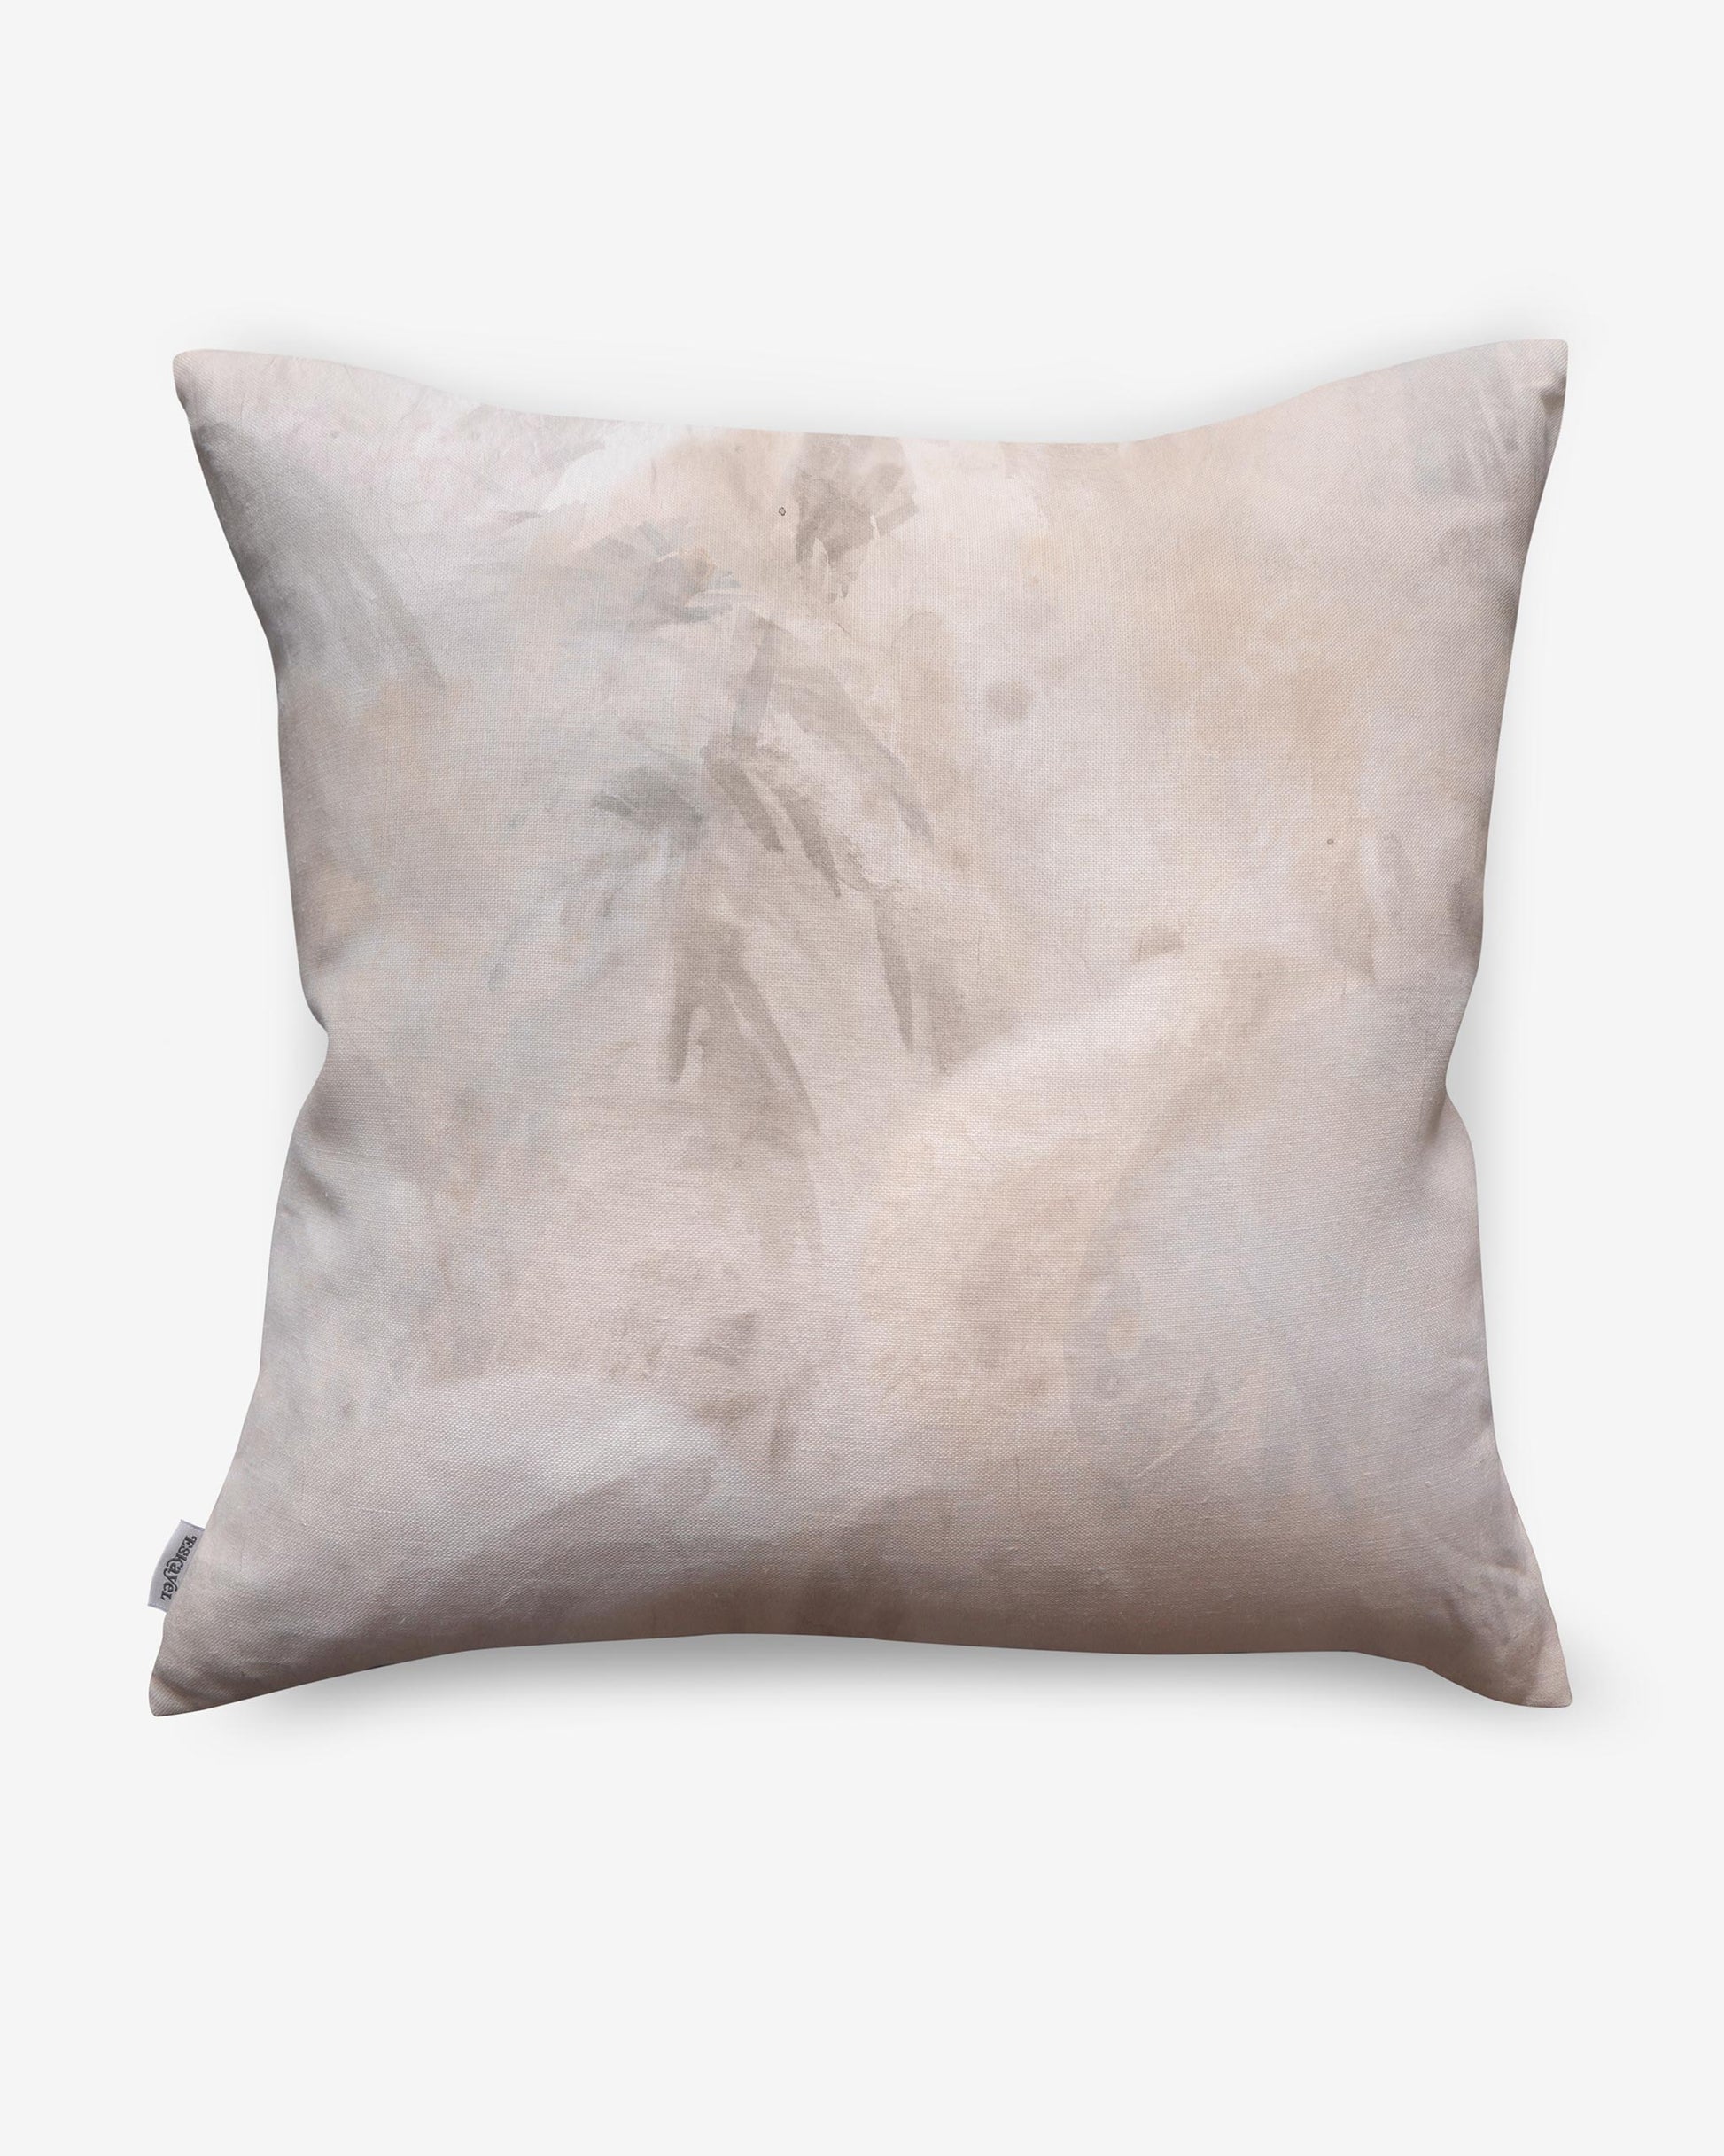 Tuscany Linen Natural 20x20 Throw Pillow from Pillow Decor